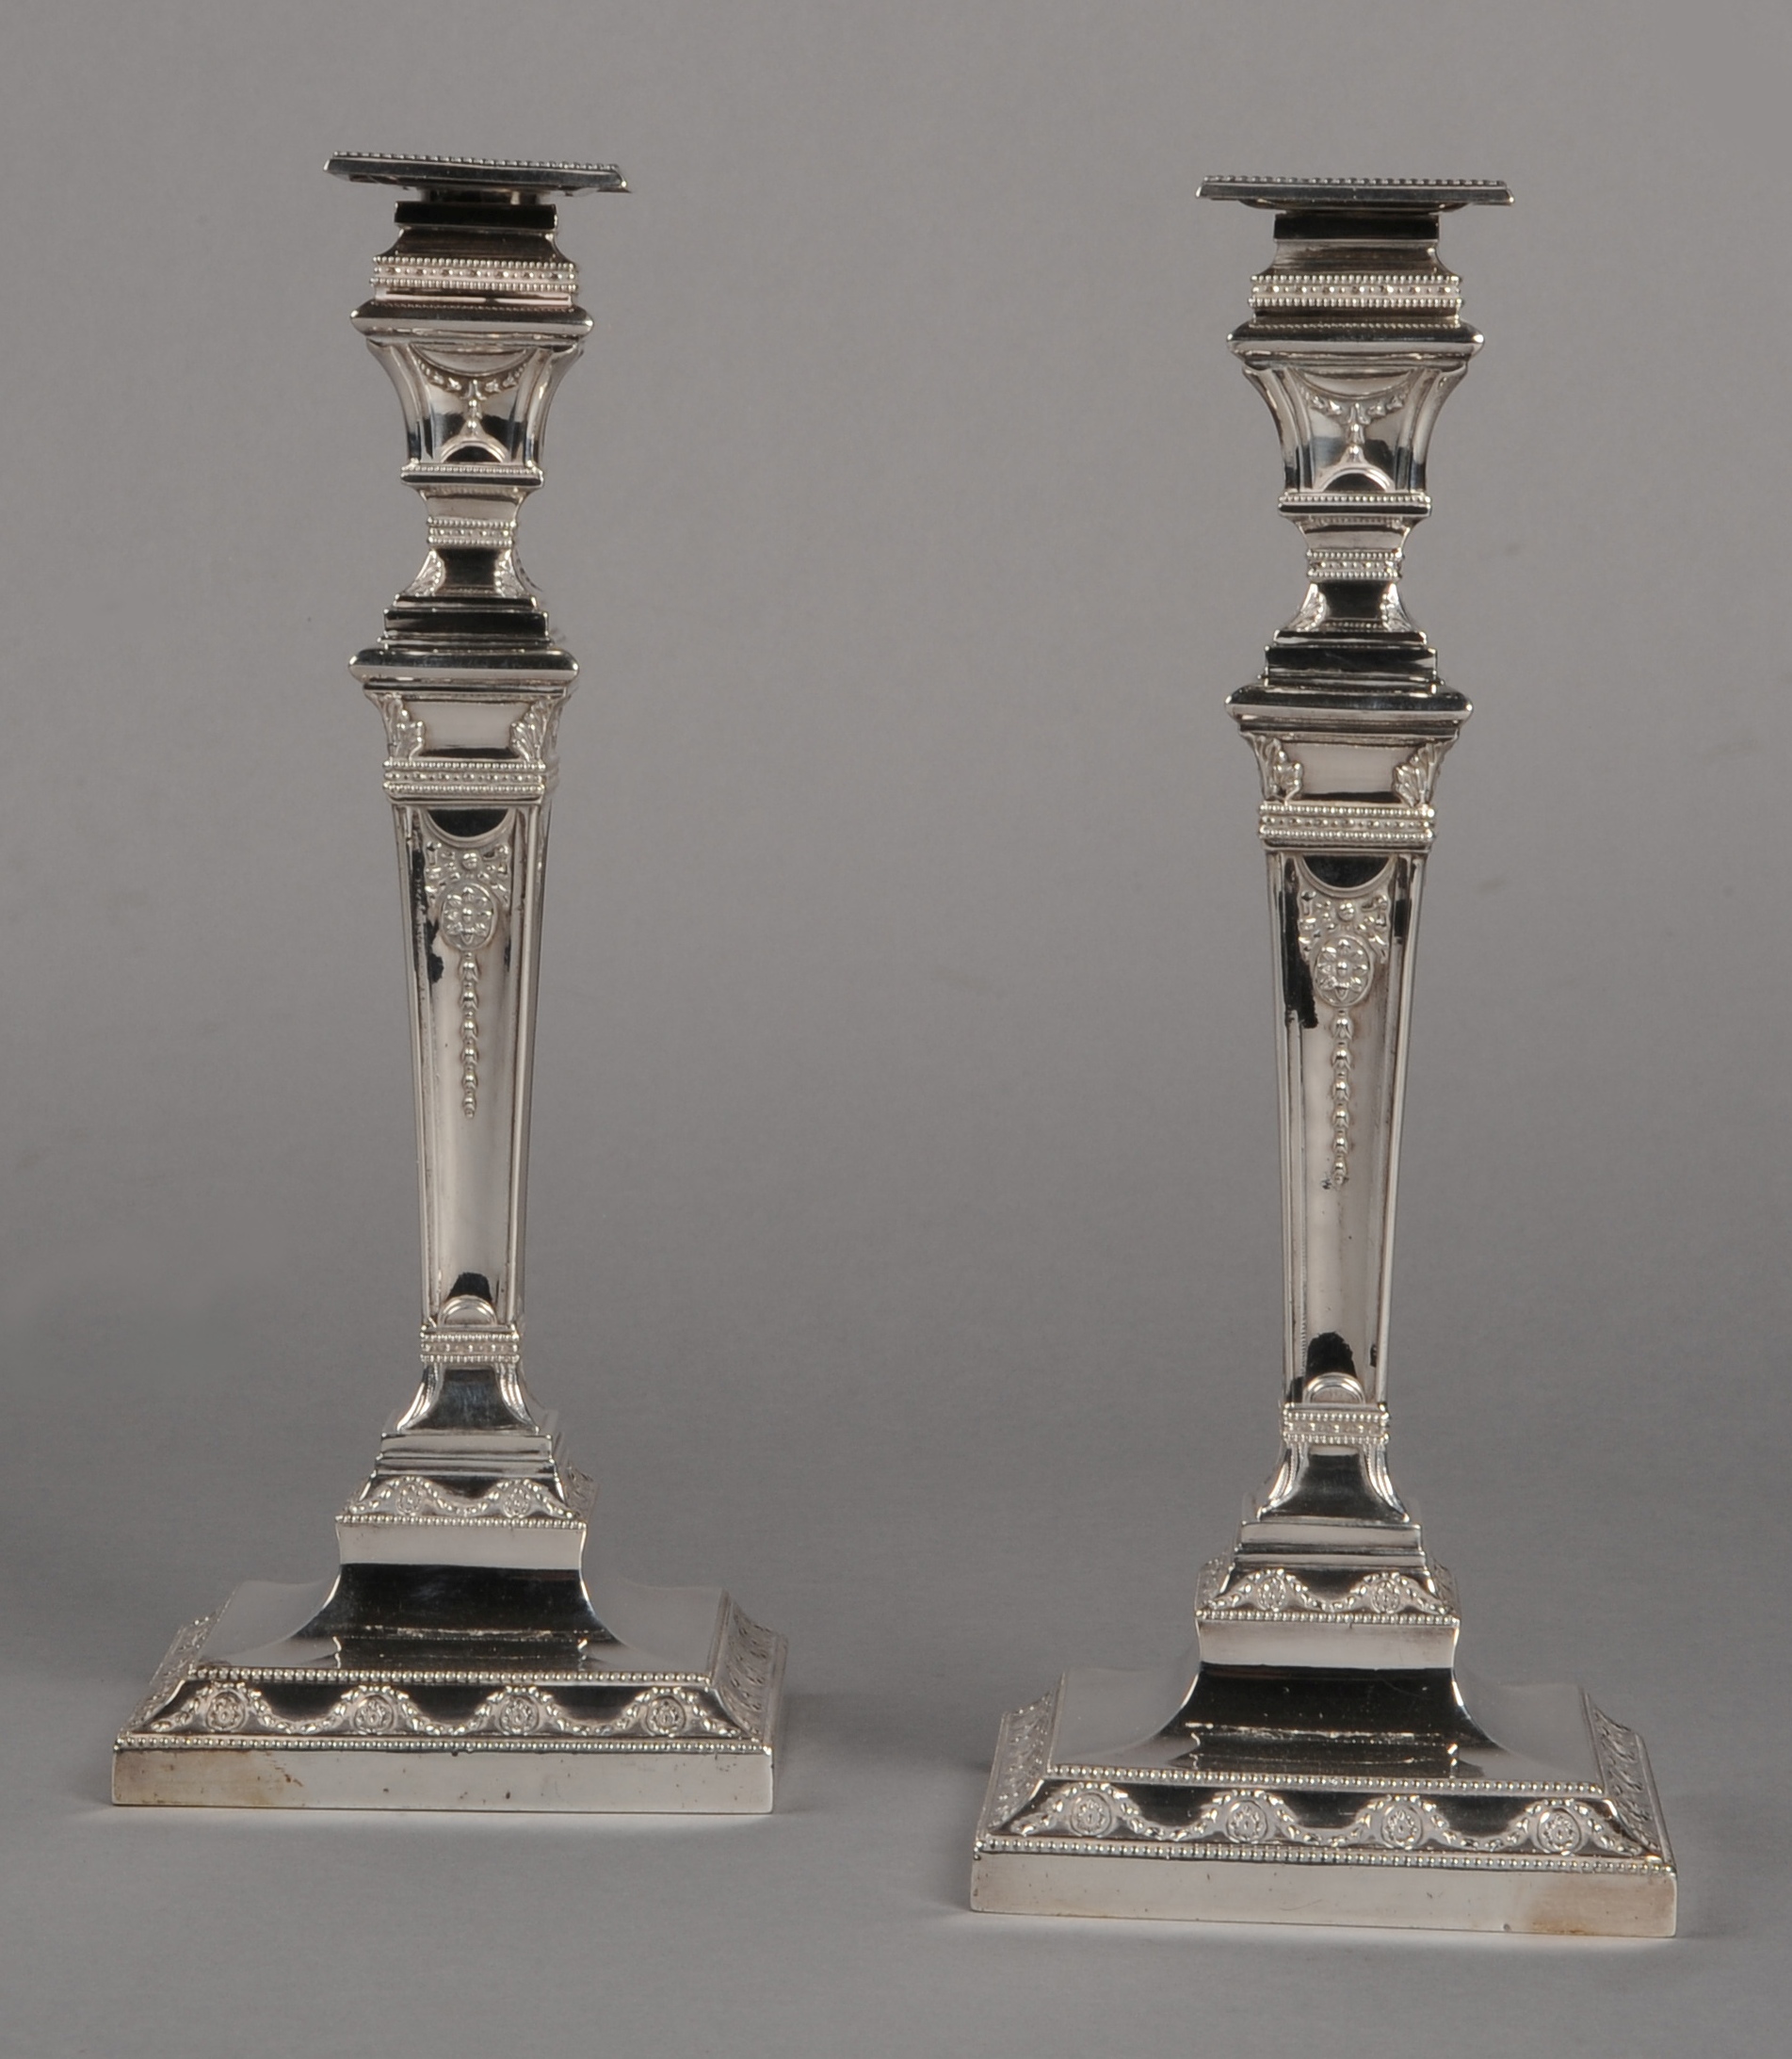 A PAIR OF VICTORIAN SILVER CANDLESTICKS, Horace Woodward & Co, London 1876, Adam style, each with